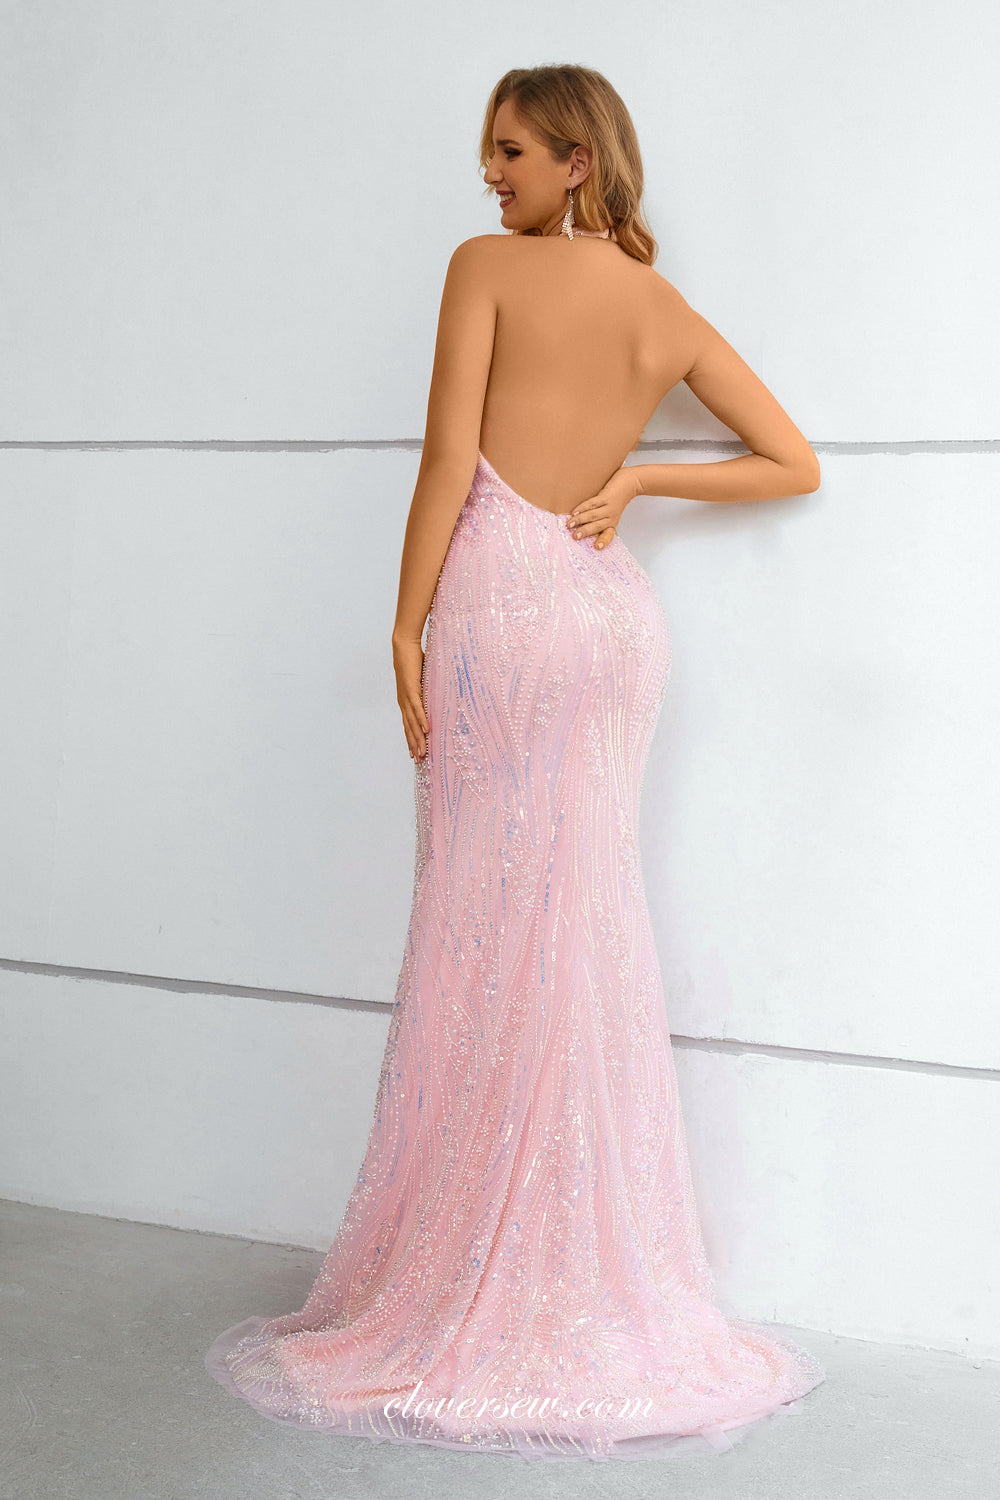 Stunning Gorgeous Beaded Lace Pink Halter Mermaid Prom Dresses, CP0921